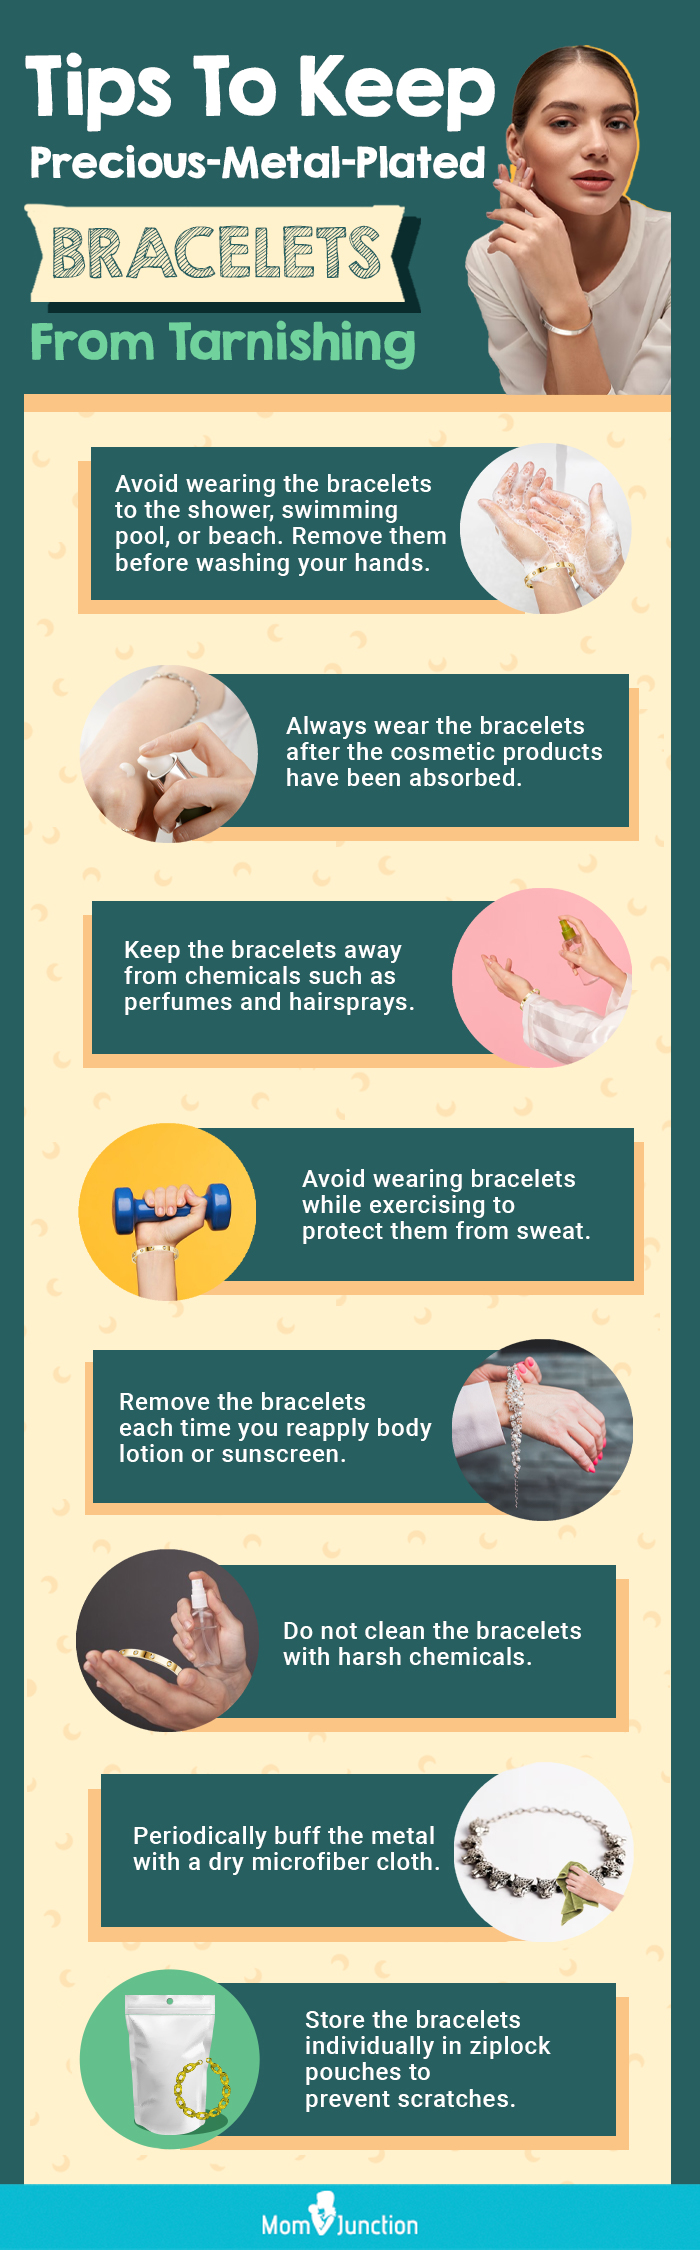 Tips To Keep Precious Metal Plated Bracelets From Tarnishing (infographic)